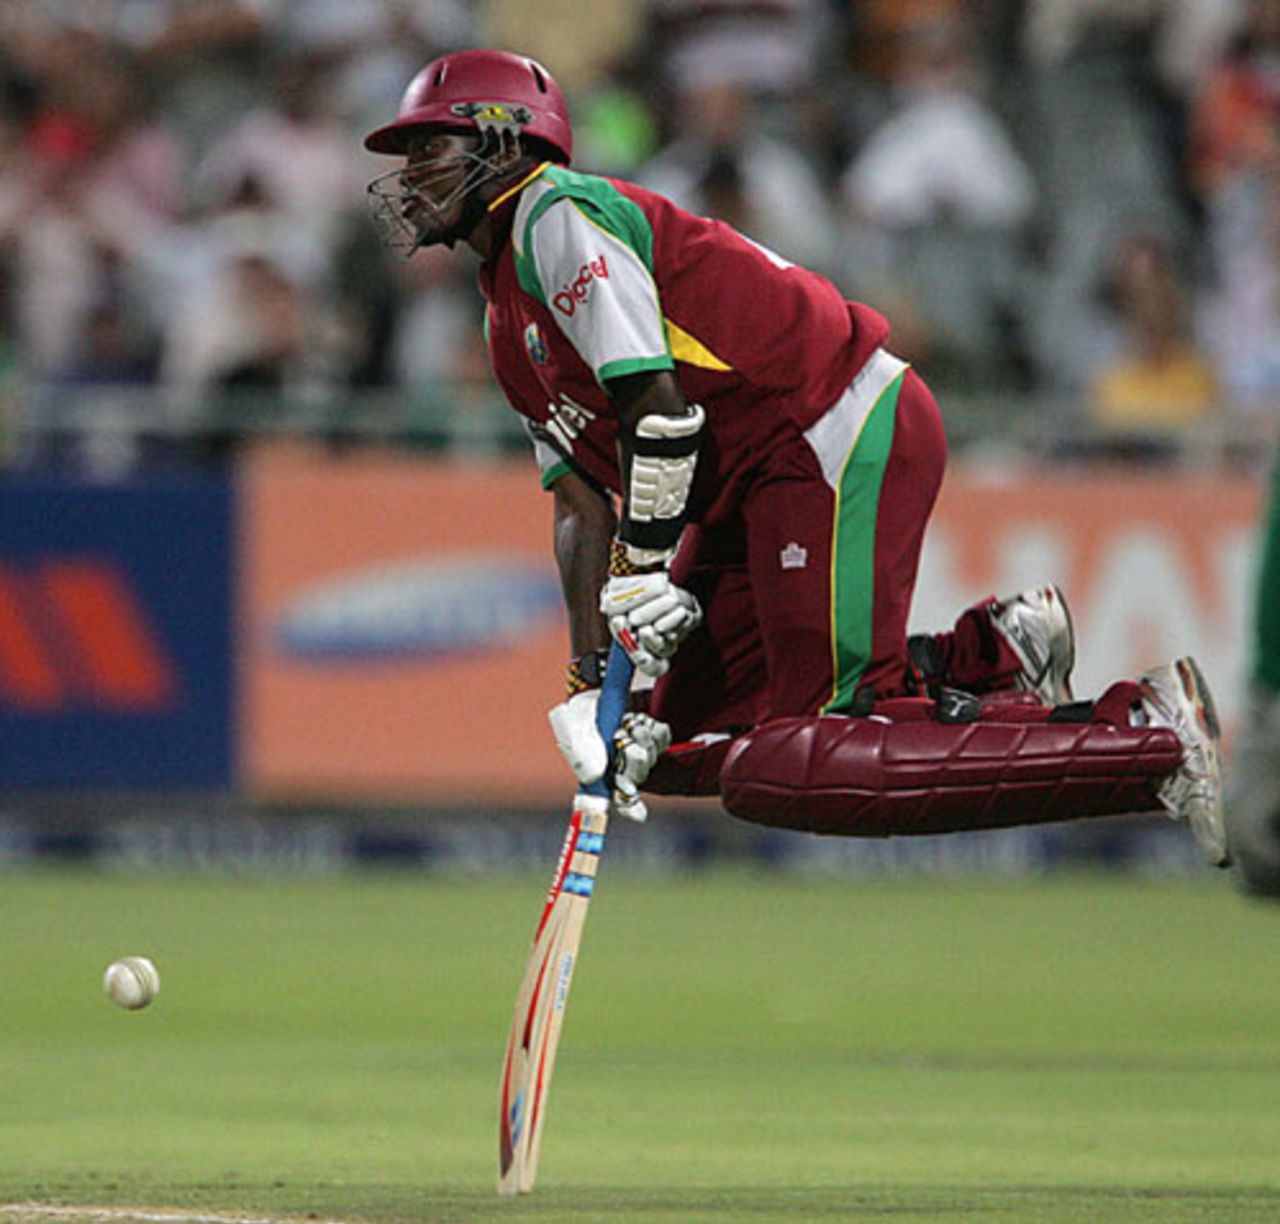 Fidel Edwards takes a yorker on the toe, South Africa v West Indies, 2nd ODI, Cape Town, January 25, 2008